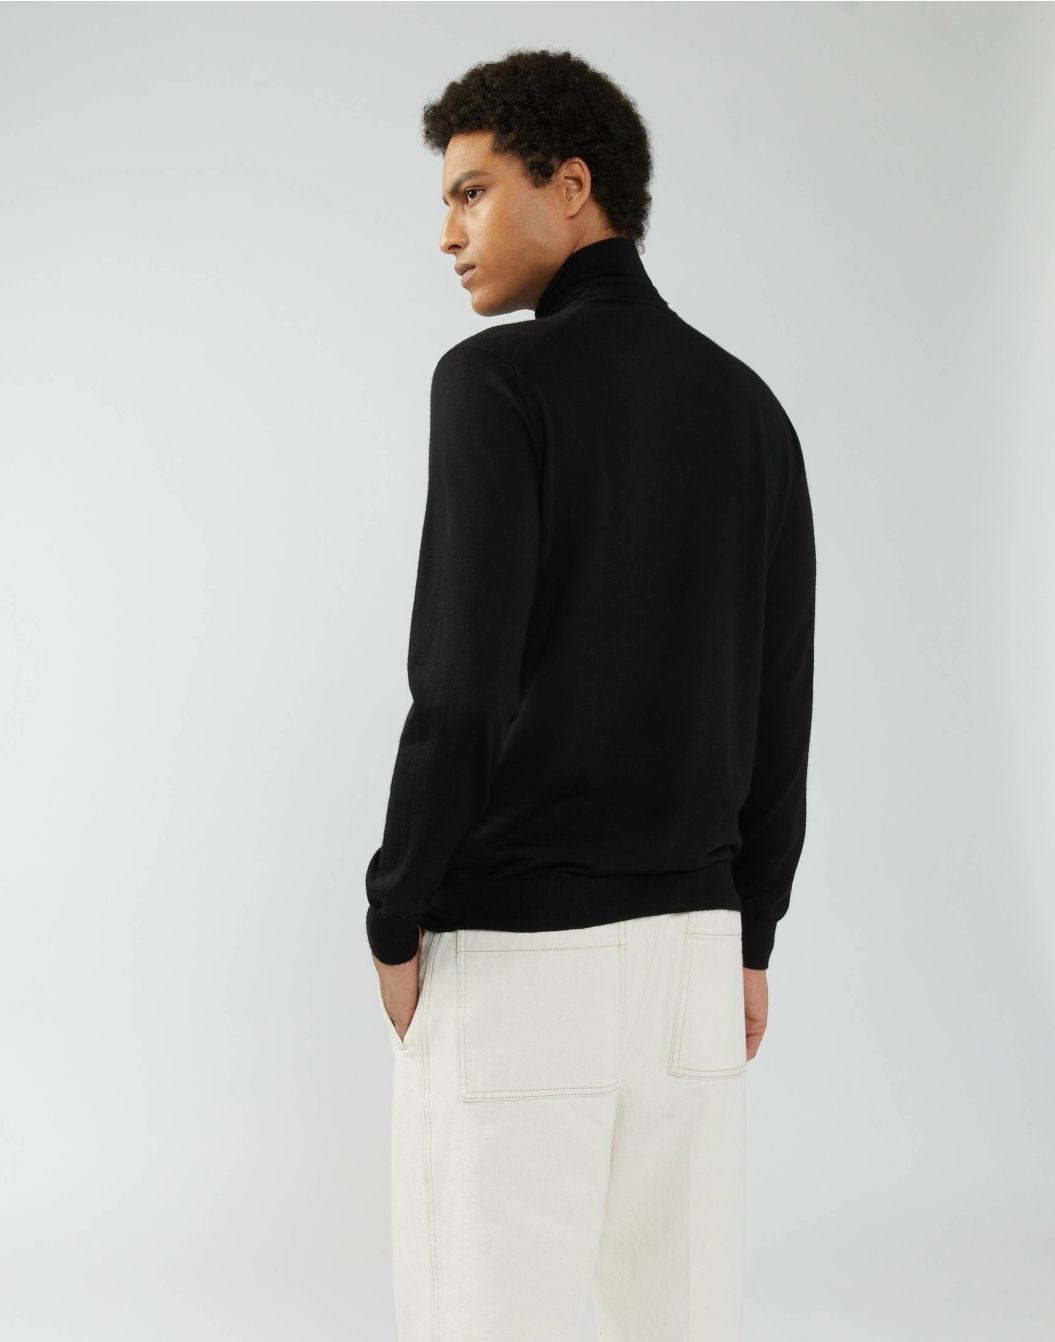 Long-sleeve turtleneck in black silk and cashmere